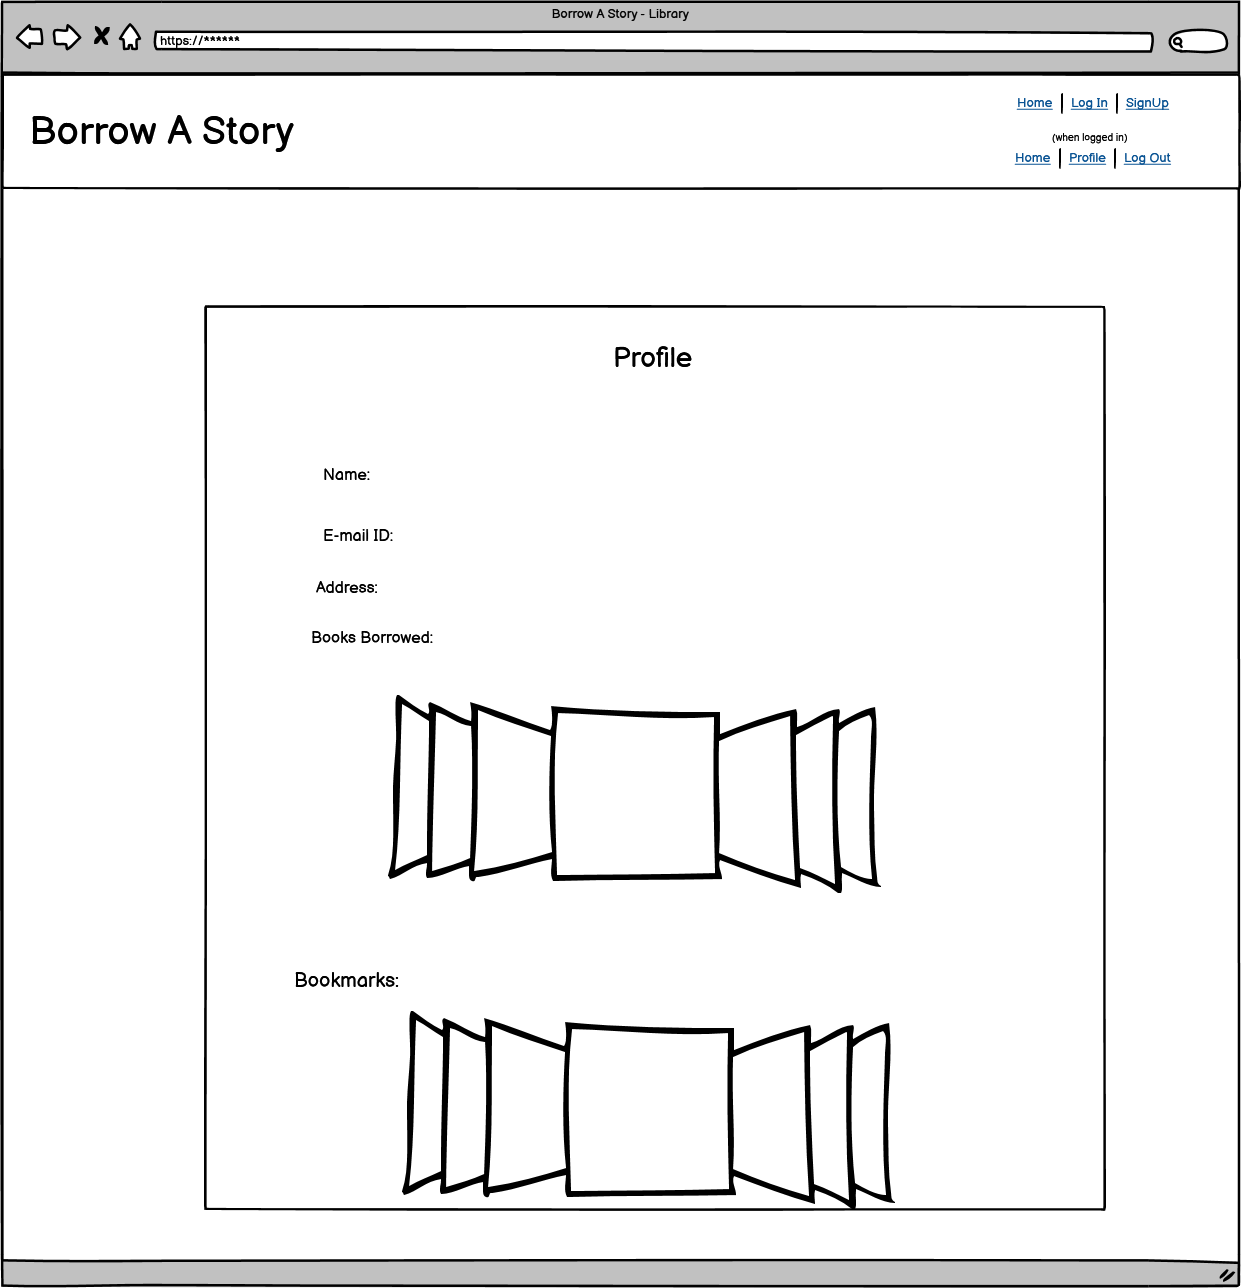 Wireframe of the profile page